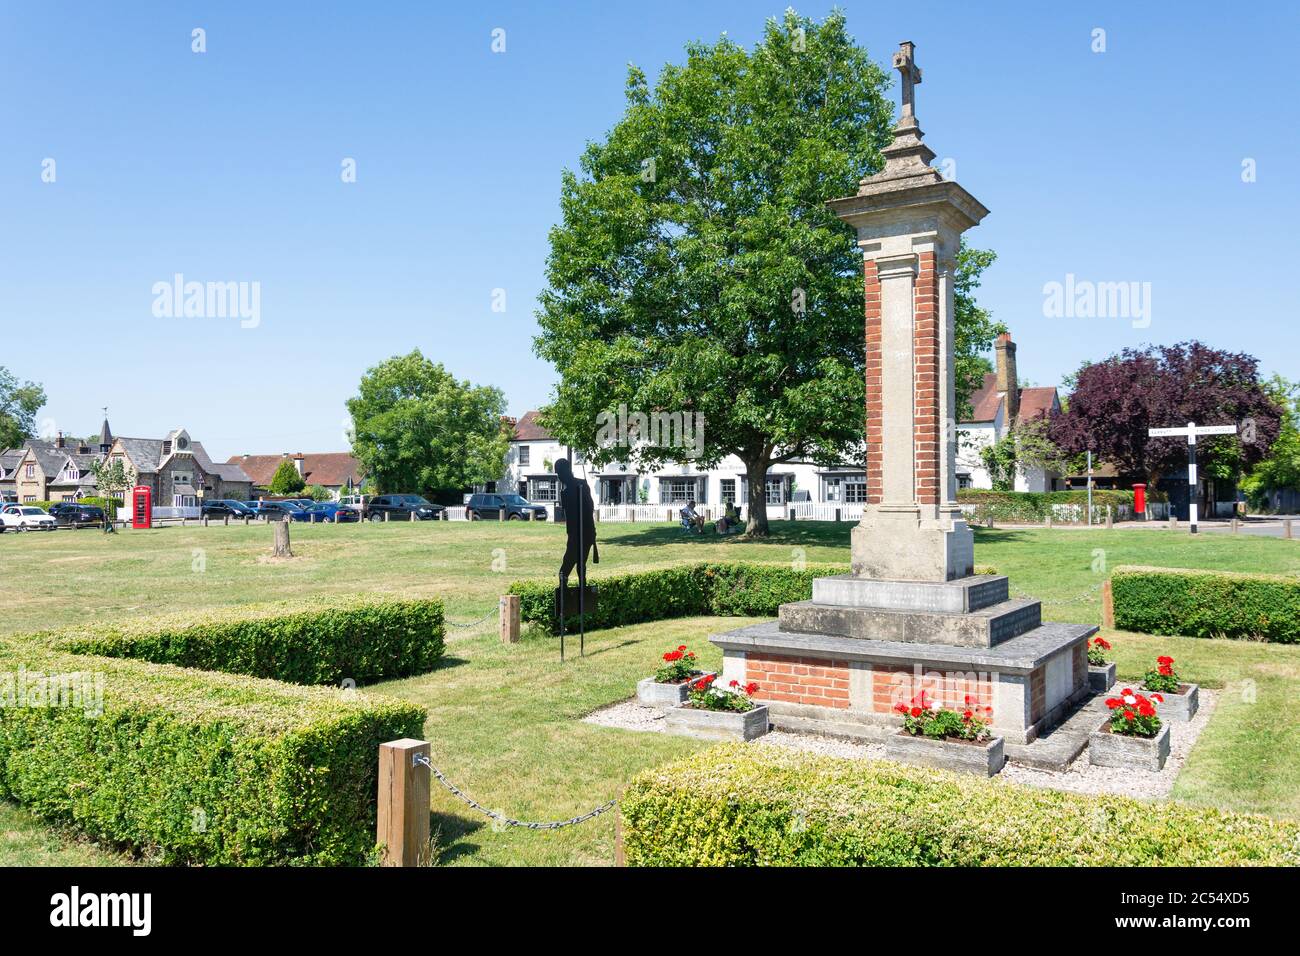 War memorial, Chipperfield Common, Chipperfield, Hertfordshire, England, United Kingdom Stock Photo